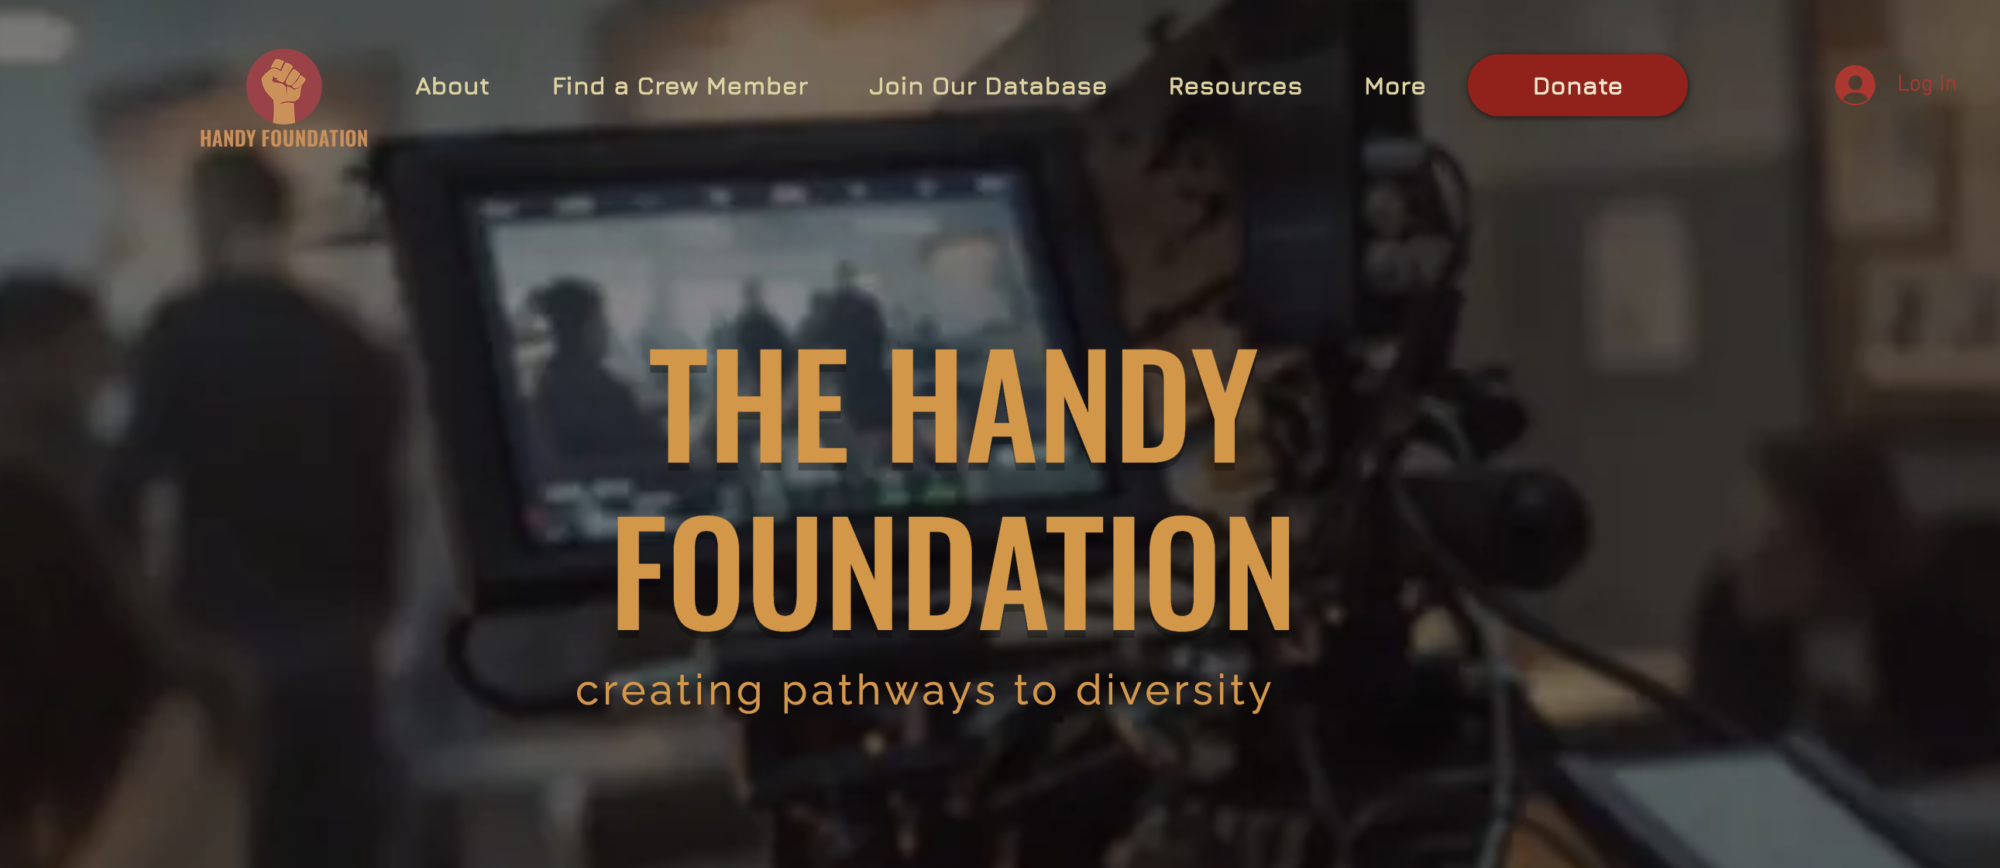 Screengrab of The Handy Foundation's website homepage